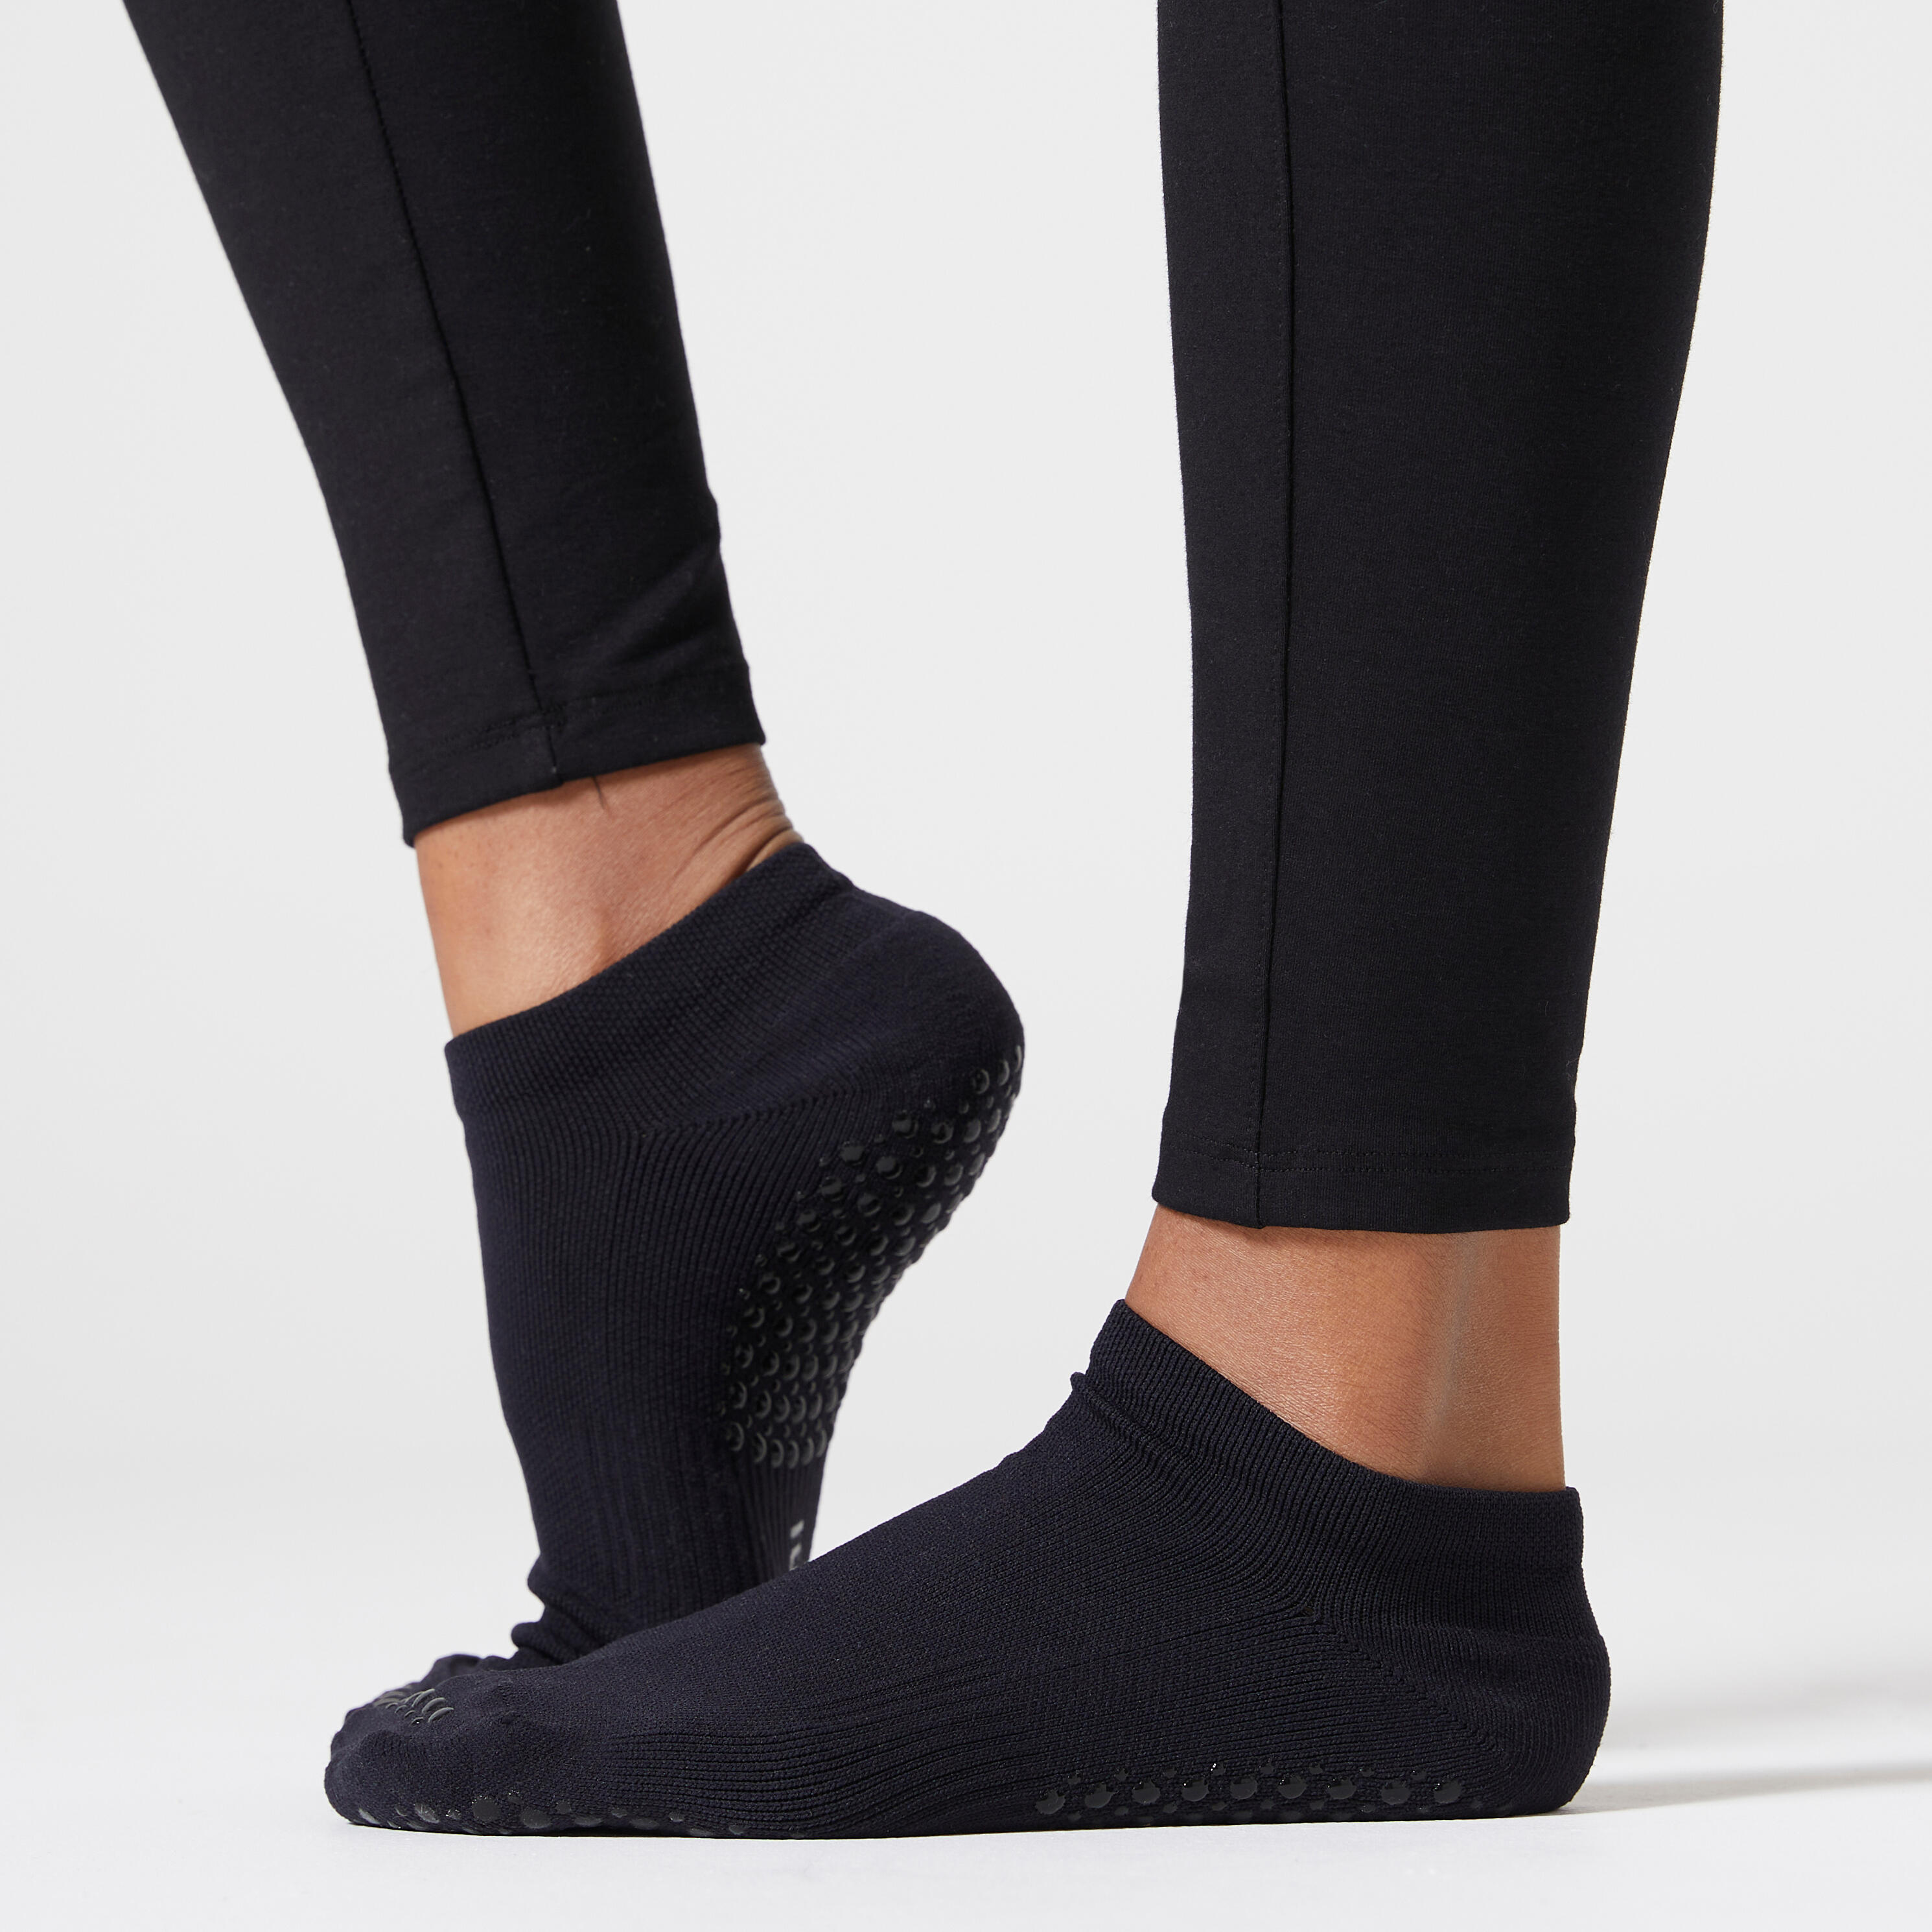 Non Slip Yoga Socks No Toes For Women Soft Silicone Ankle Sock With Anti  Friction Grip For Fitness, Gym, Dance, Pilates, Outdoor Cycling, Running,  And Jogging From Dandankang, $1.58